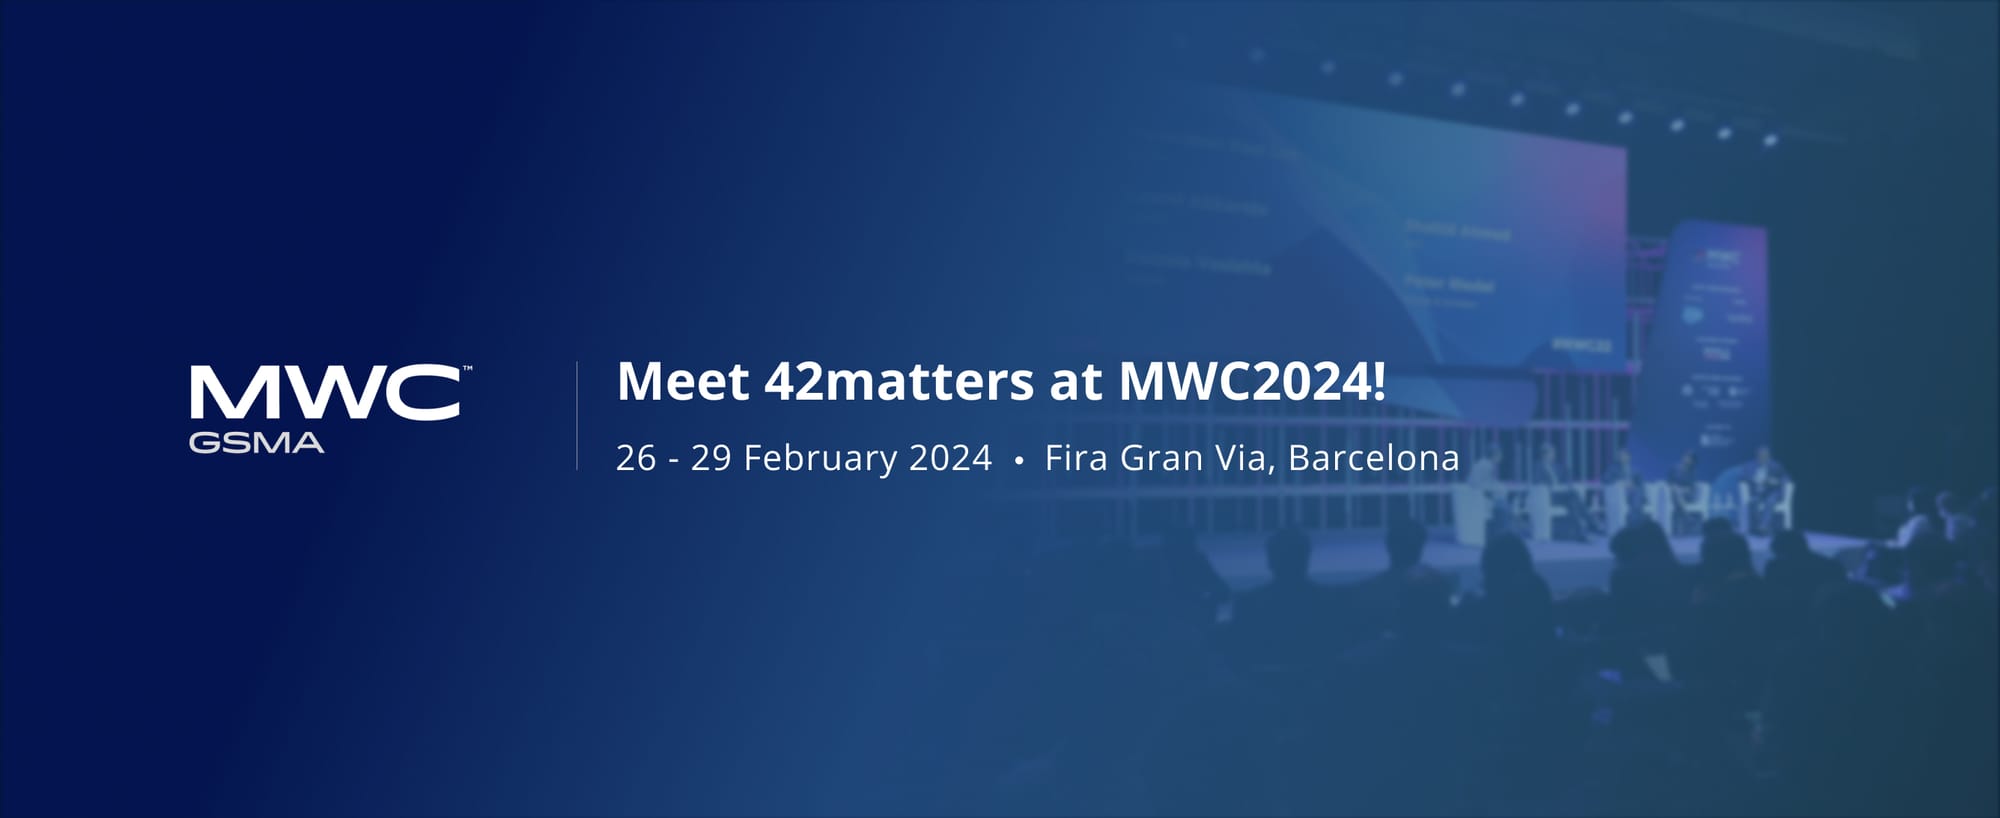 Meet 42matters at MWC24 Barcelona!